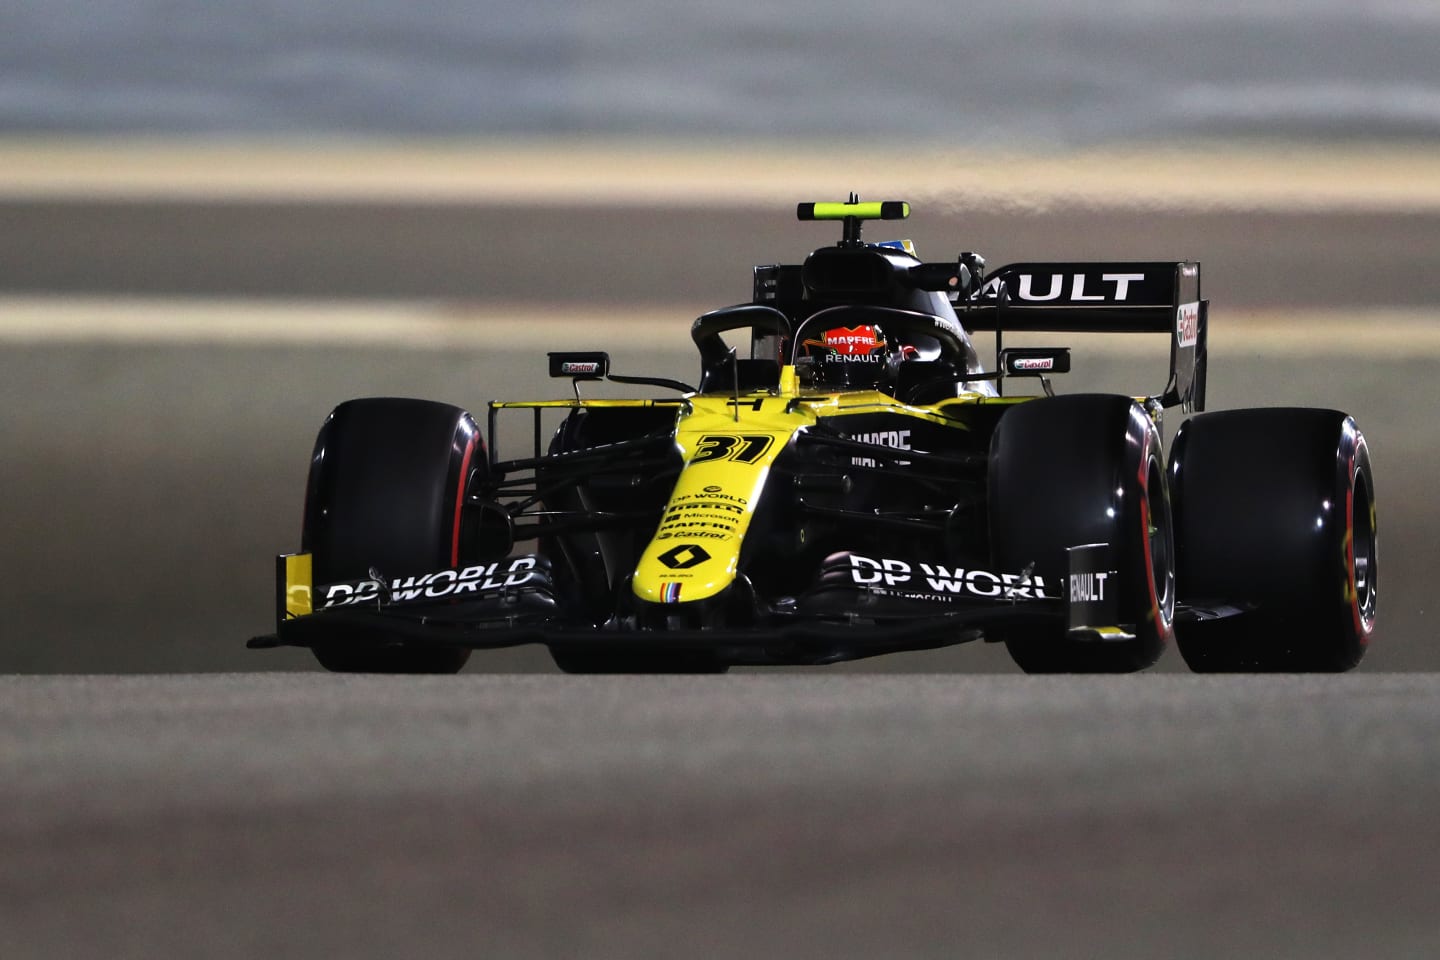 BAHRAIN, BAHRAIN - DECEMBER 04: Esteban Ocon of France driving the (31) Renault Sport Formula One Team RS20 on track during practice ahead of the F1 Grand Prix of Sakhir at Bahrain International Circuit on December 04, 2020 in Bahrain, Bahrain. (Photo by Kamran Jebreili - Pool/Getty Images)